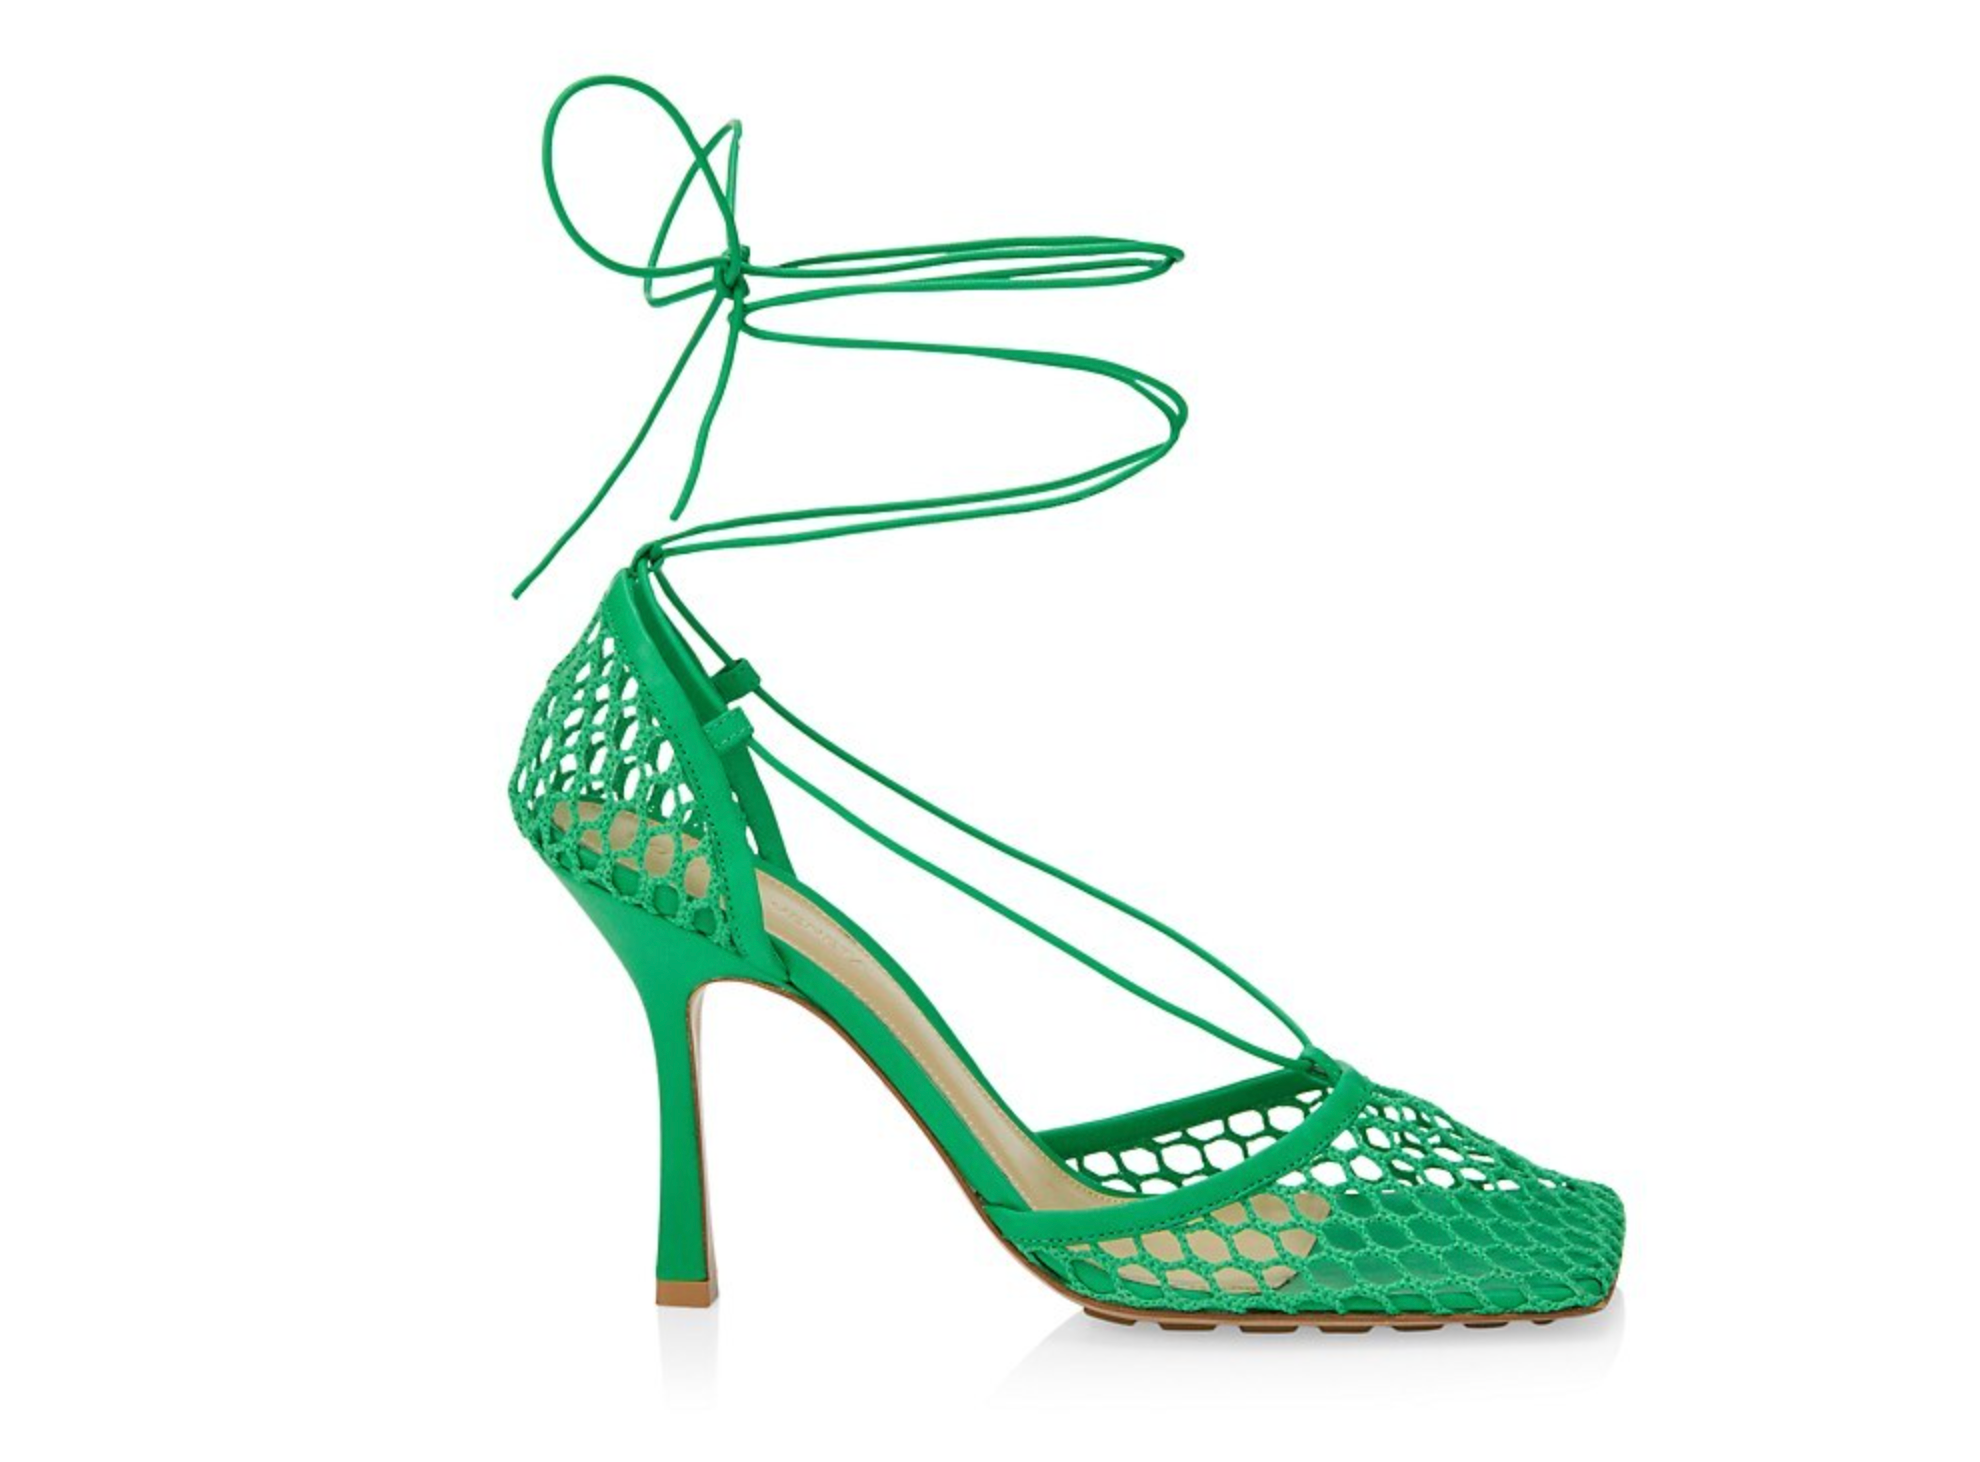 The Bottega Veneta Stretch Mesh-Panel Sandals Are Already Poised To Be The Shoe Of The Summer